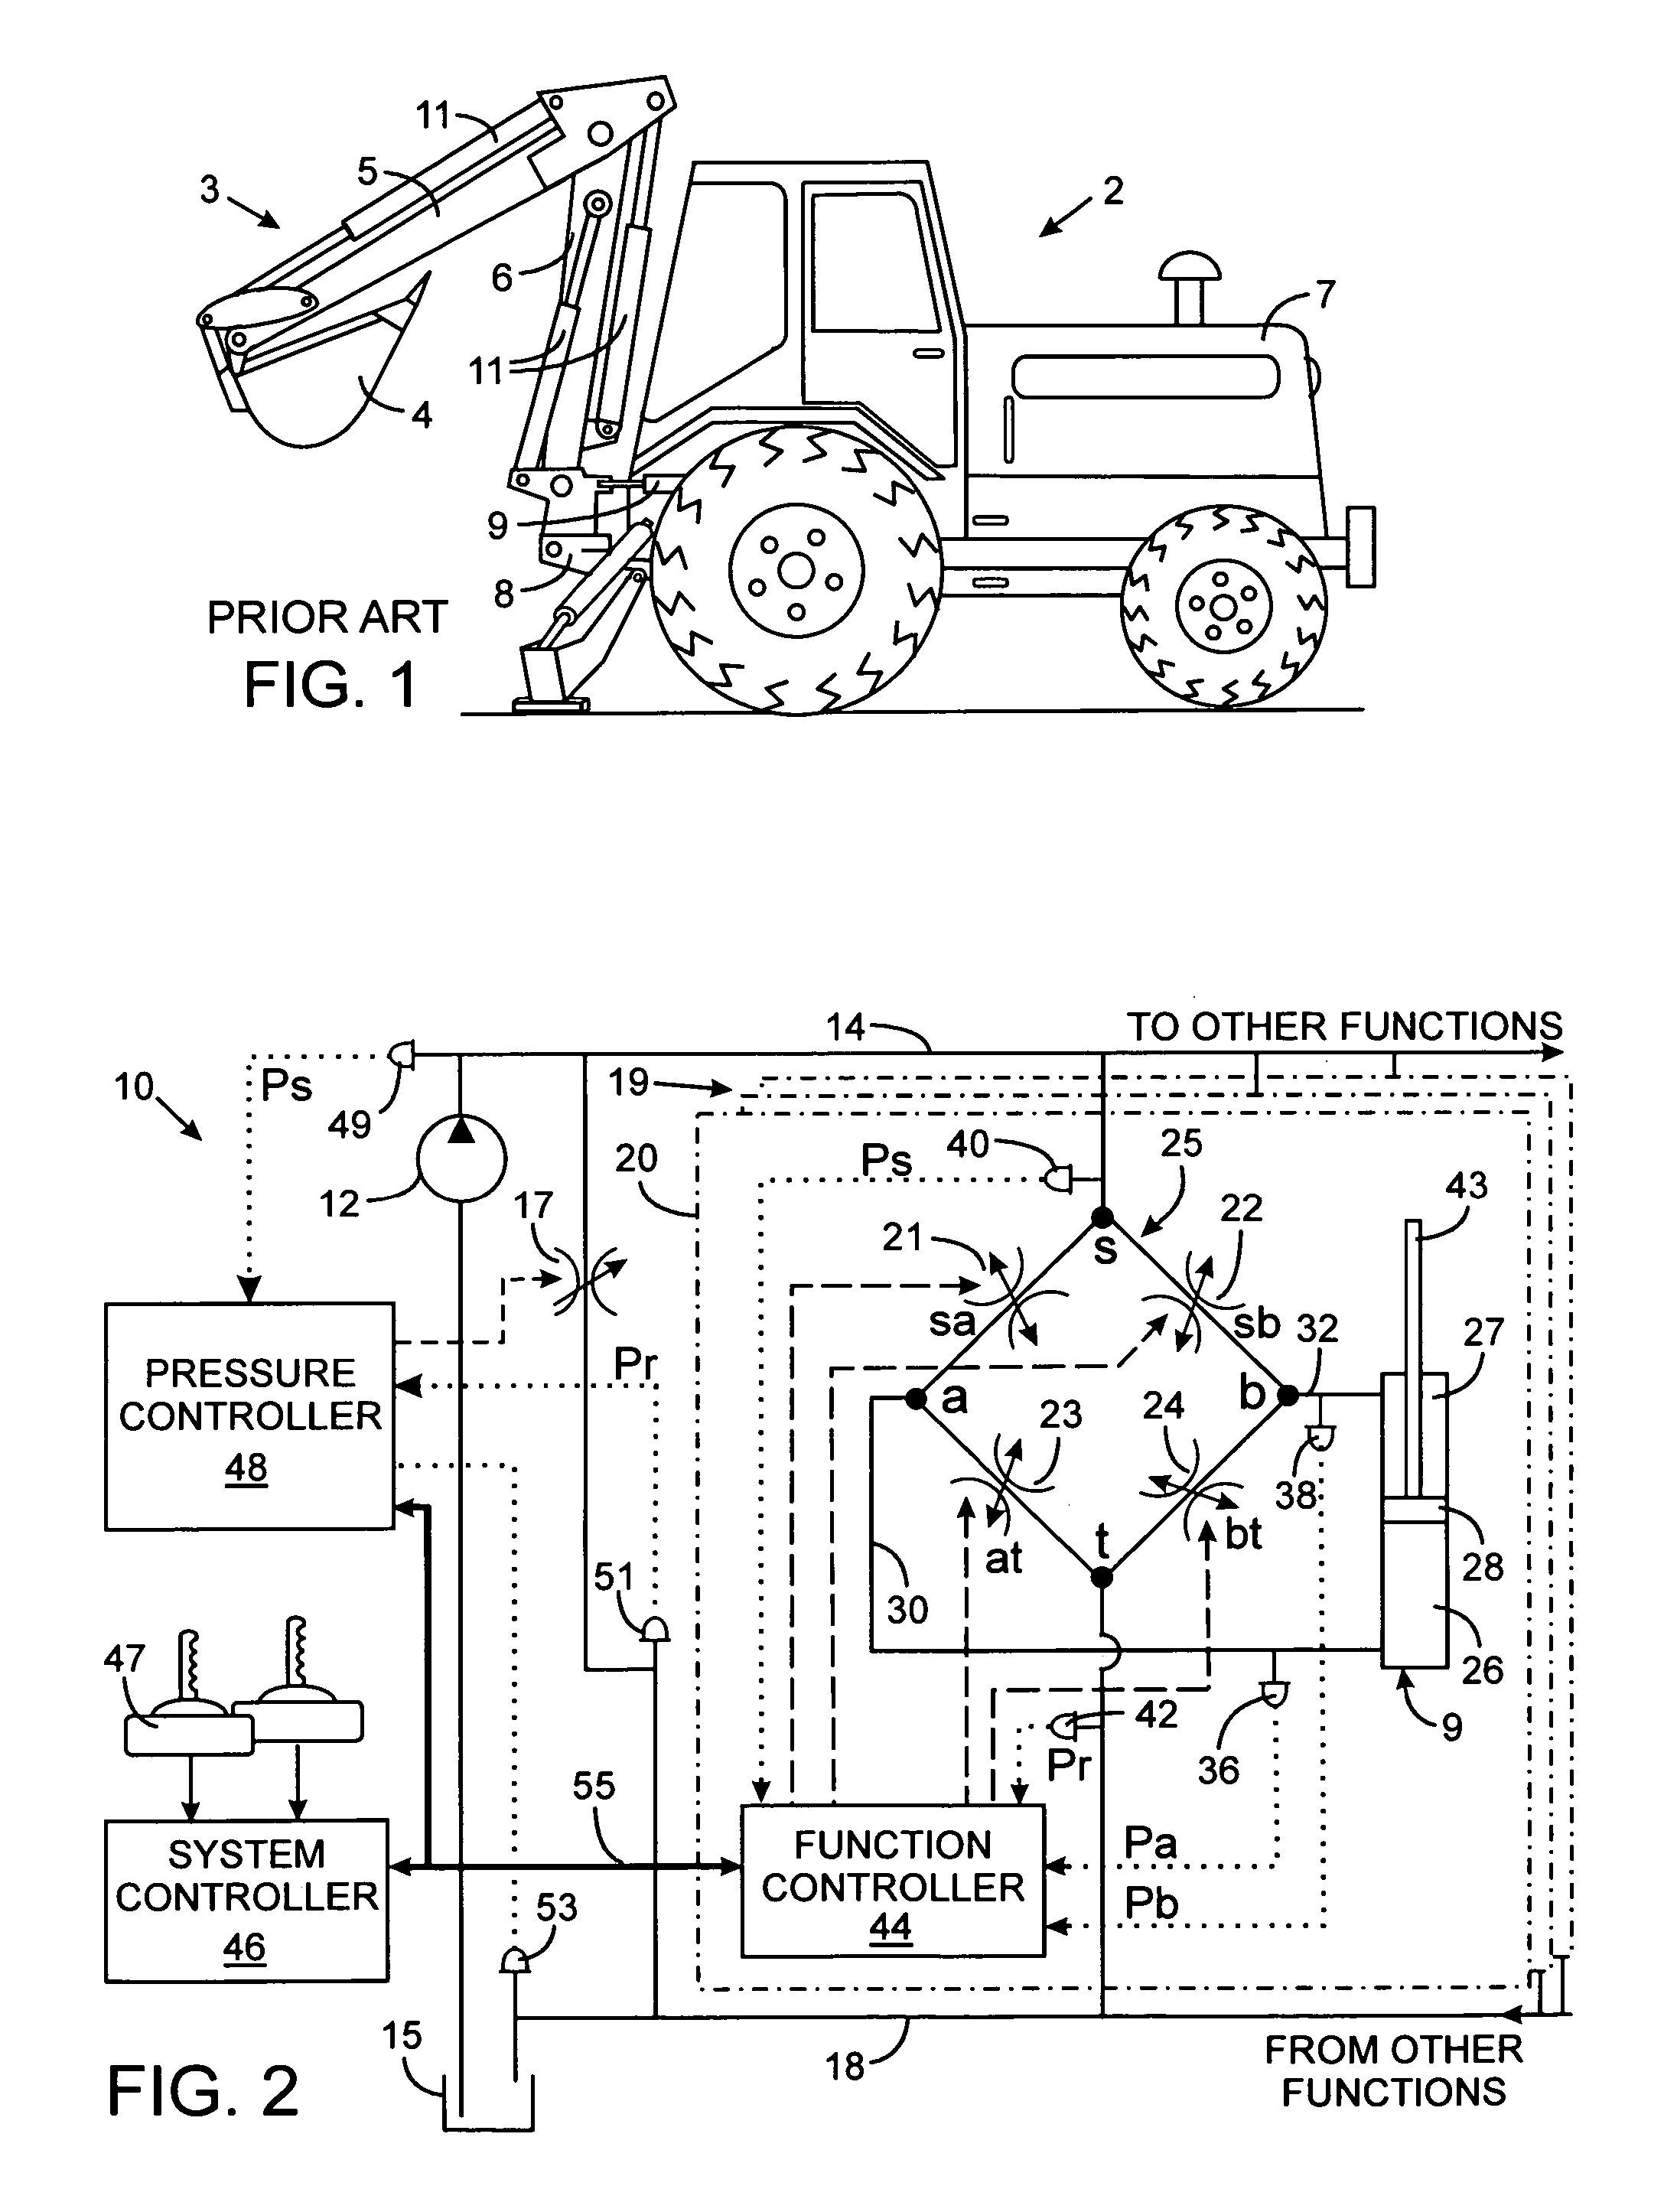 Apparatus for controlling deceleration of hydraulically powered equipment